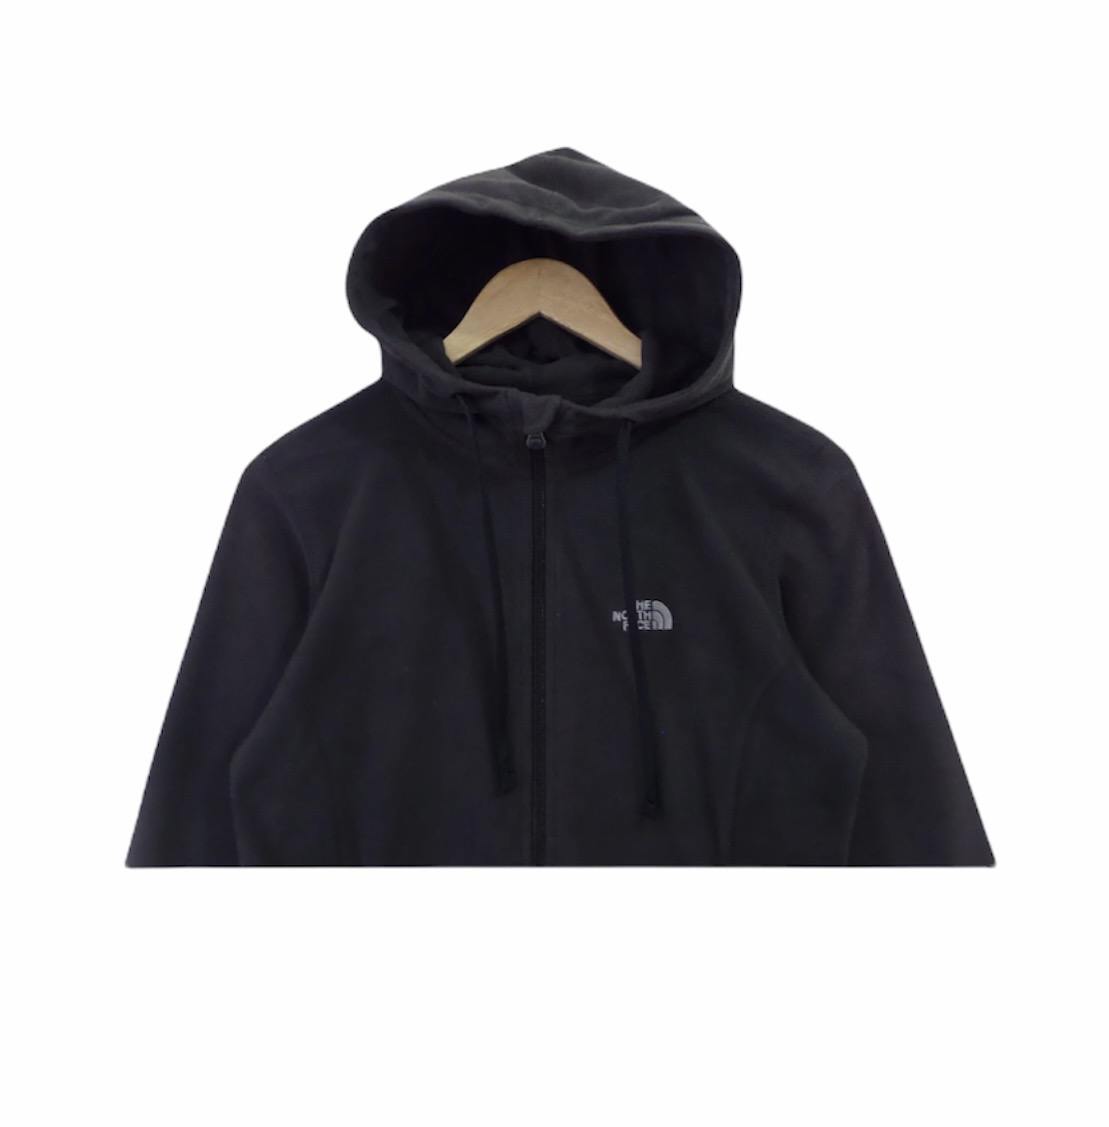 The North Face Fleece Sweater Hoodie Jacket - 3